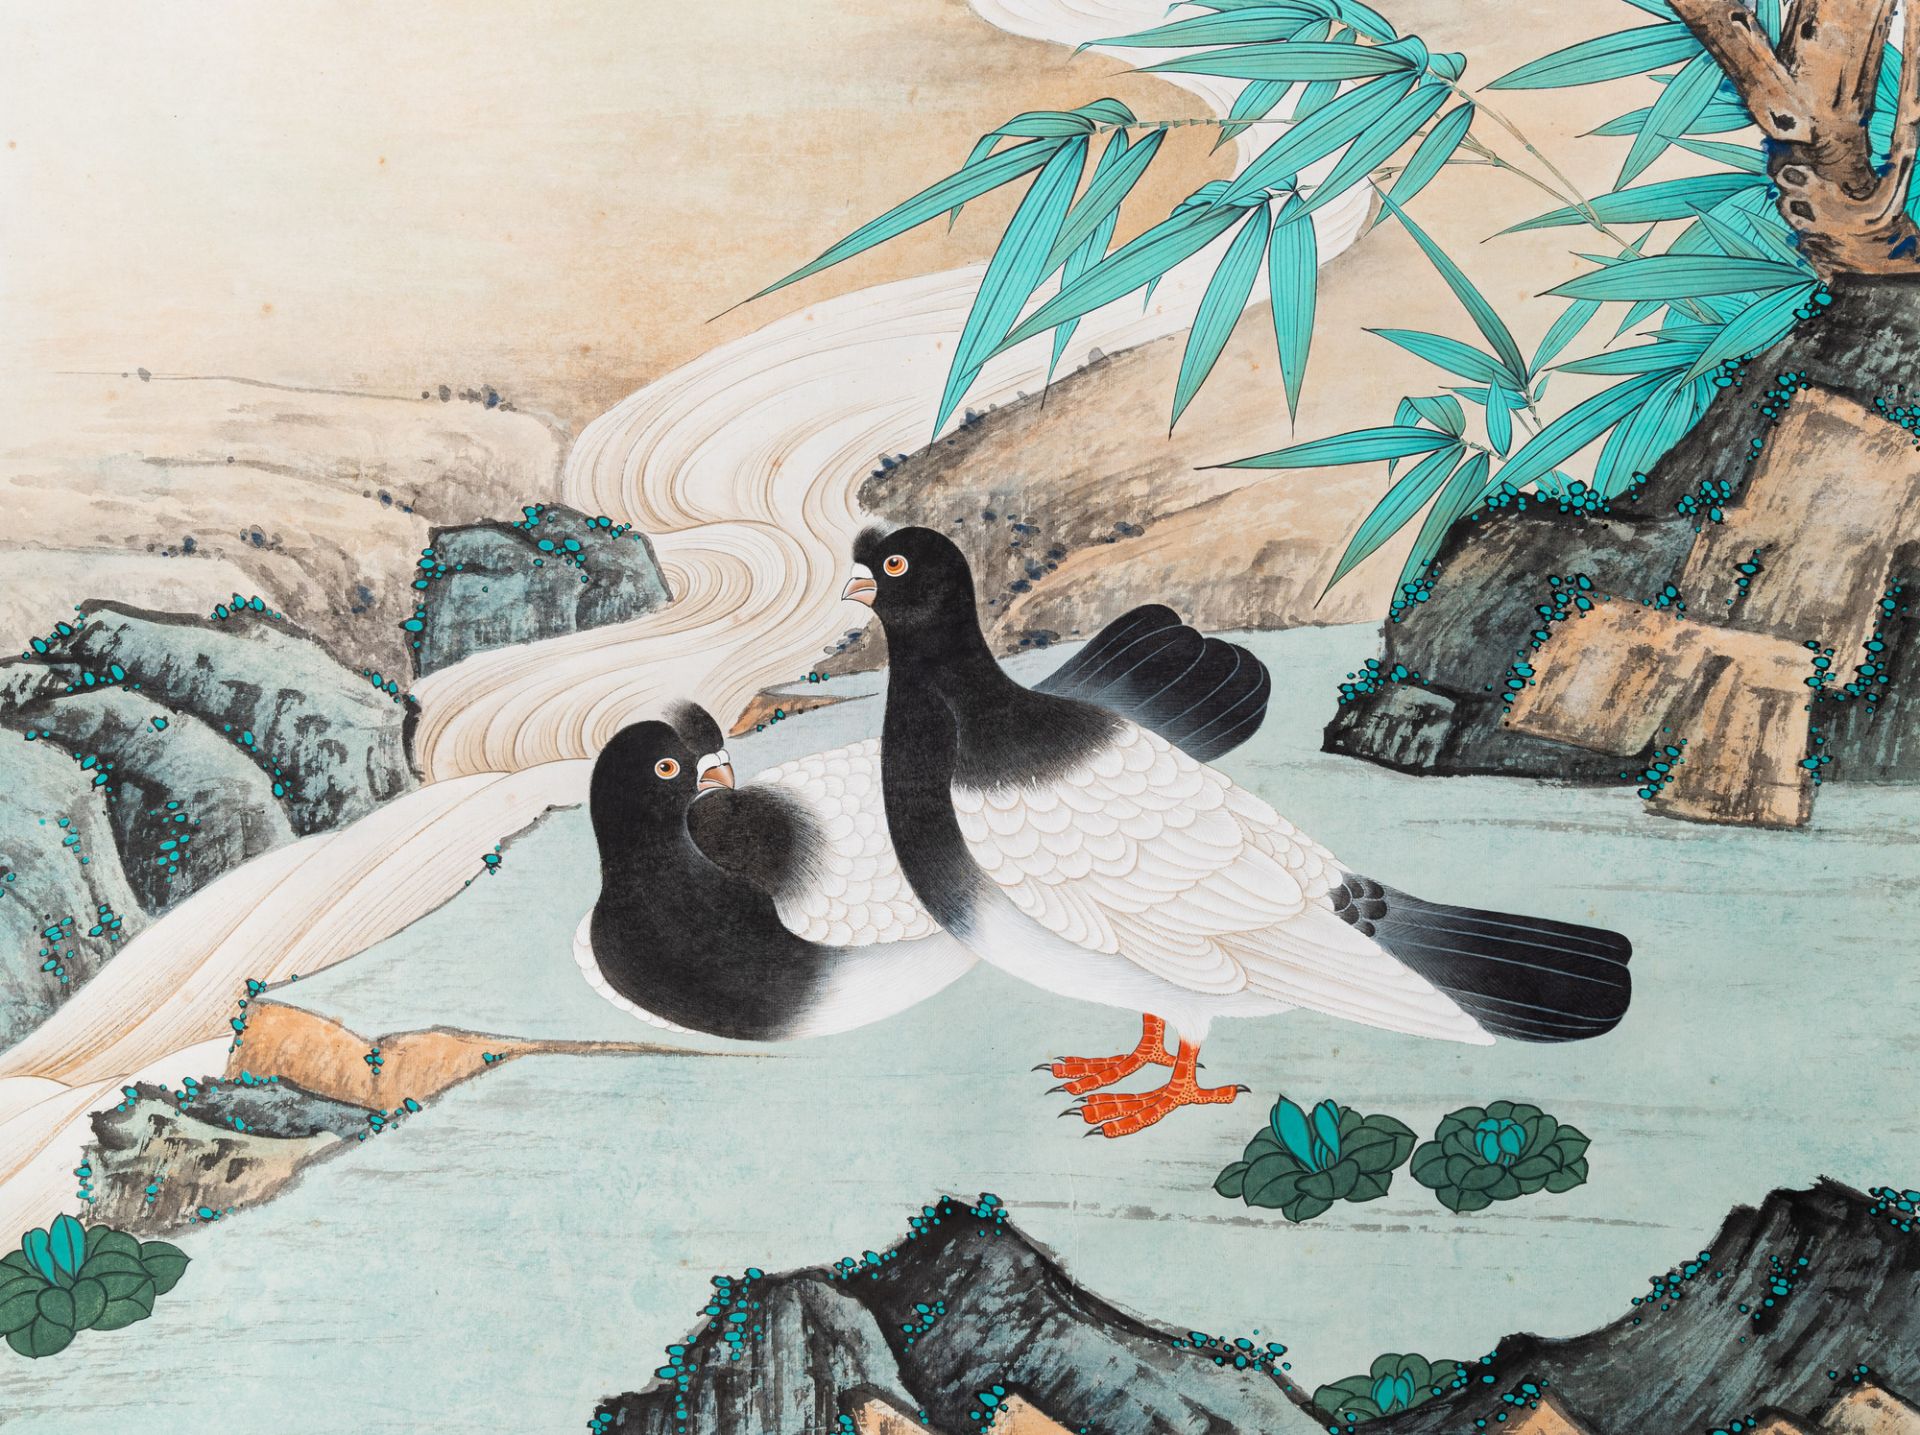 Sun Yunsheng (1918-2000): ÔPeace dovesÕ, ink and colour on paper - Image 7 of 21